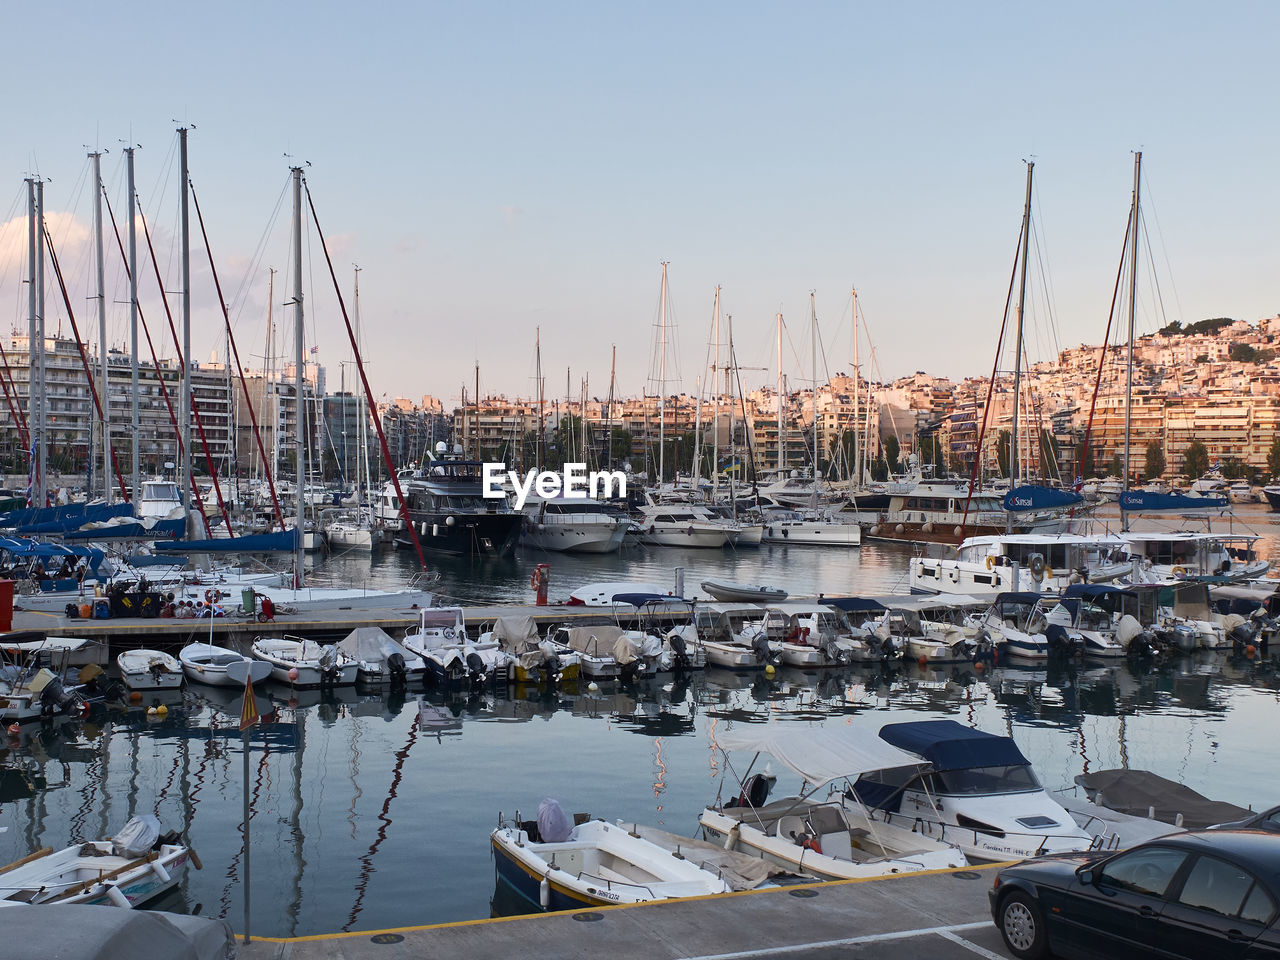 Piraeus, greece - september 2018. yachts, sailboats and other nautical vessels in the harbor